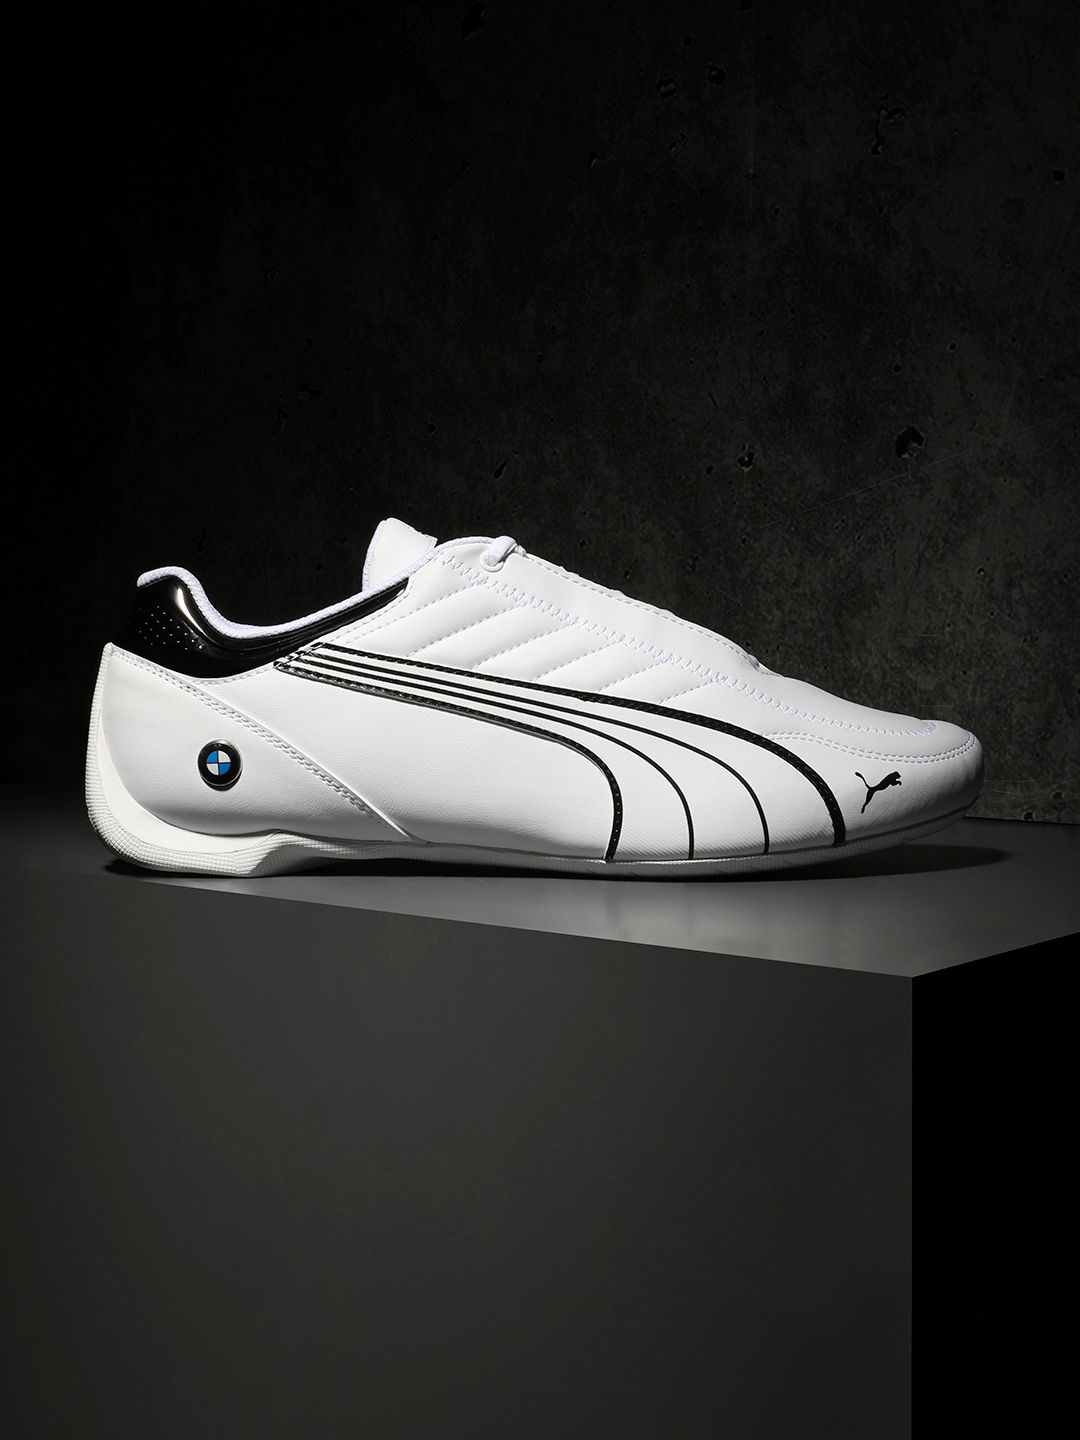 bmw shoes online